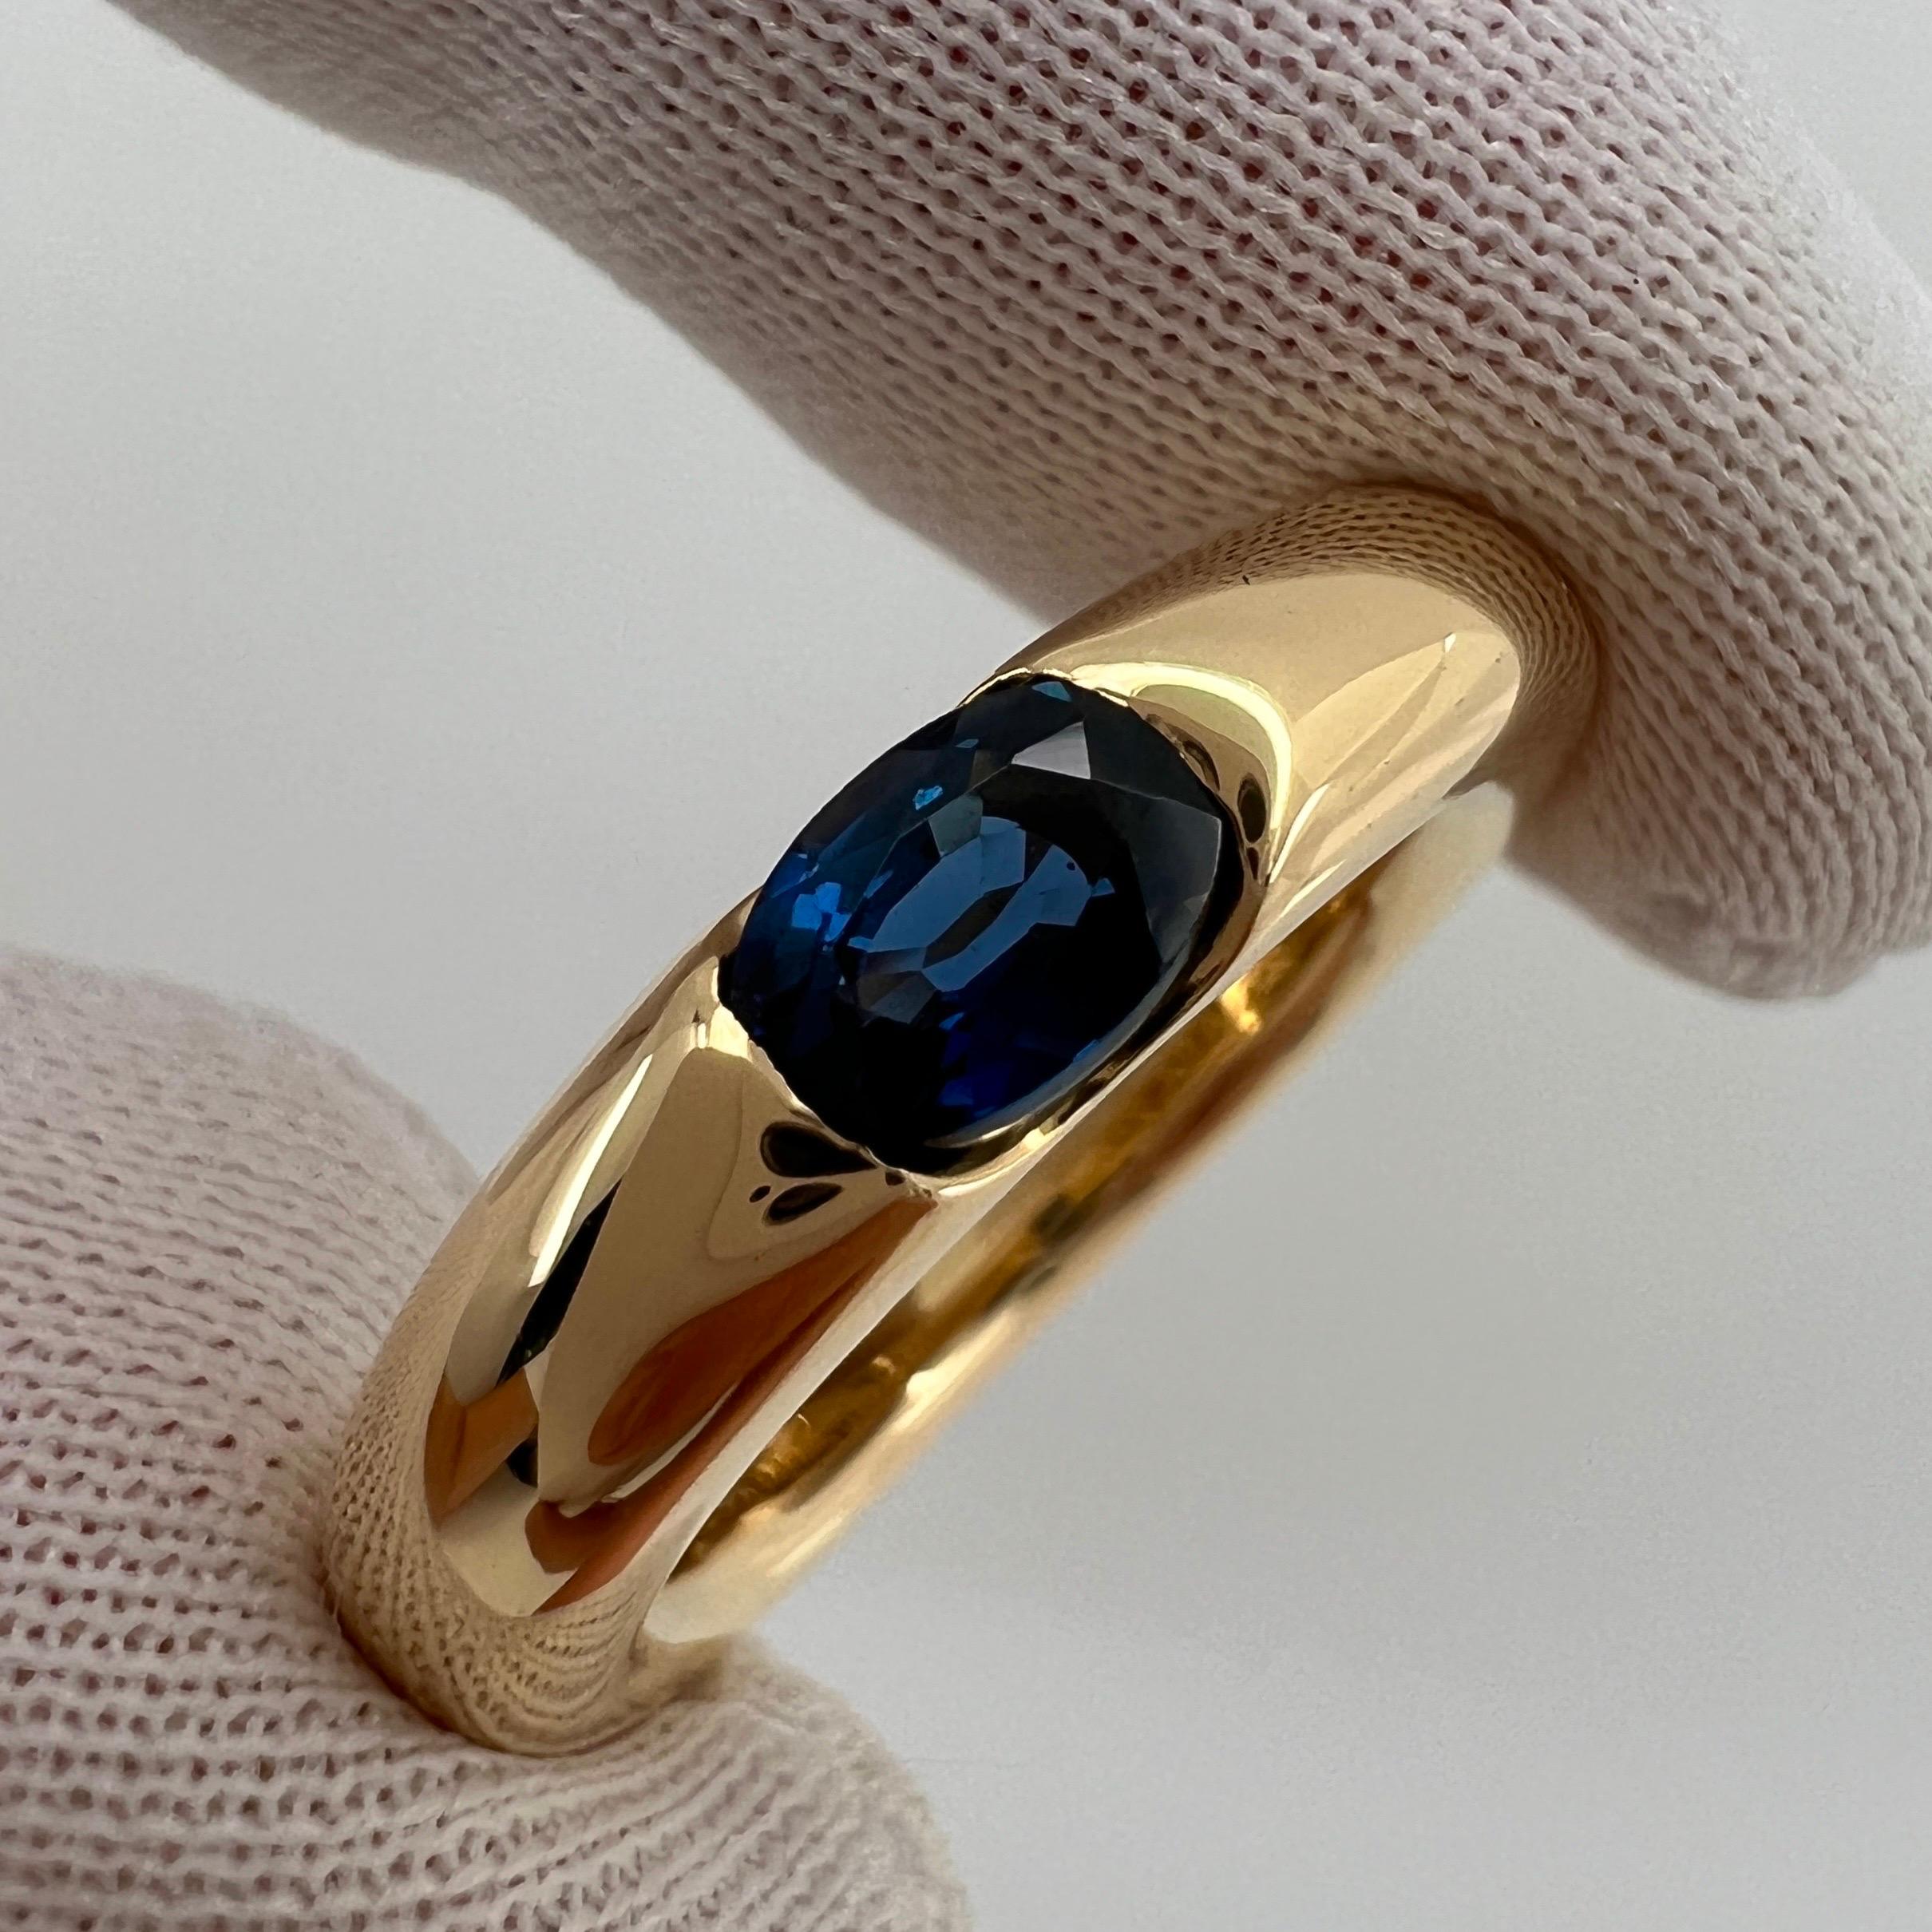 Vintage Cartier Deep Blue Sapphire Oval Ellipse 18k Yellow Gold Solitaire Ring 5 6